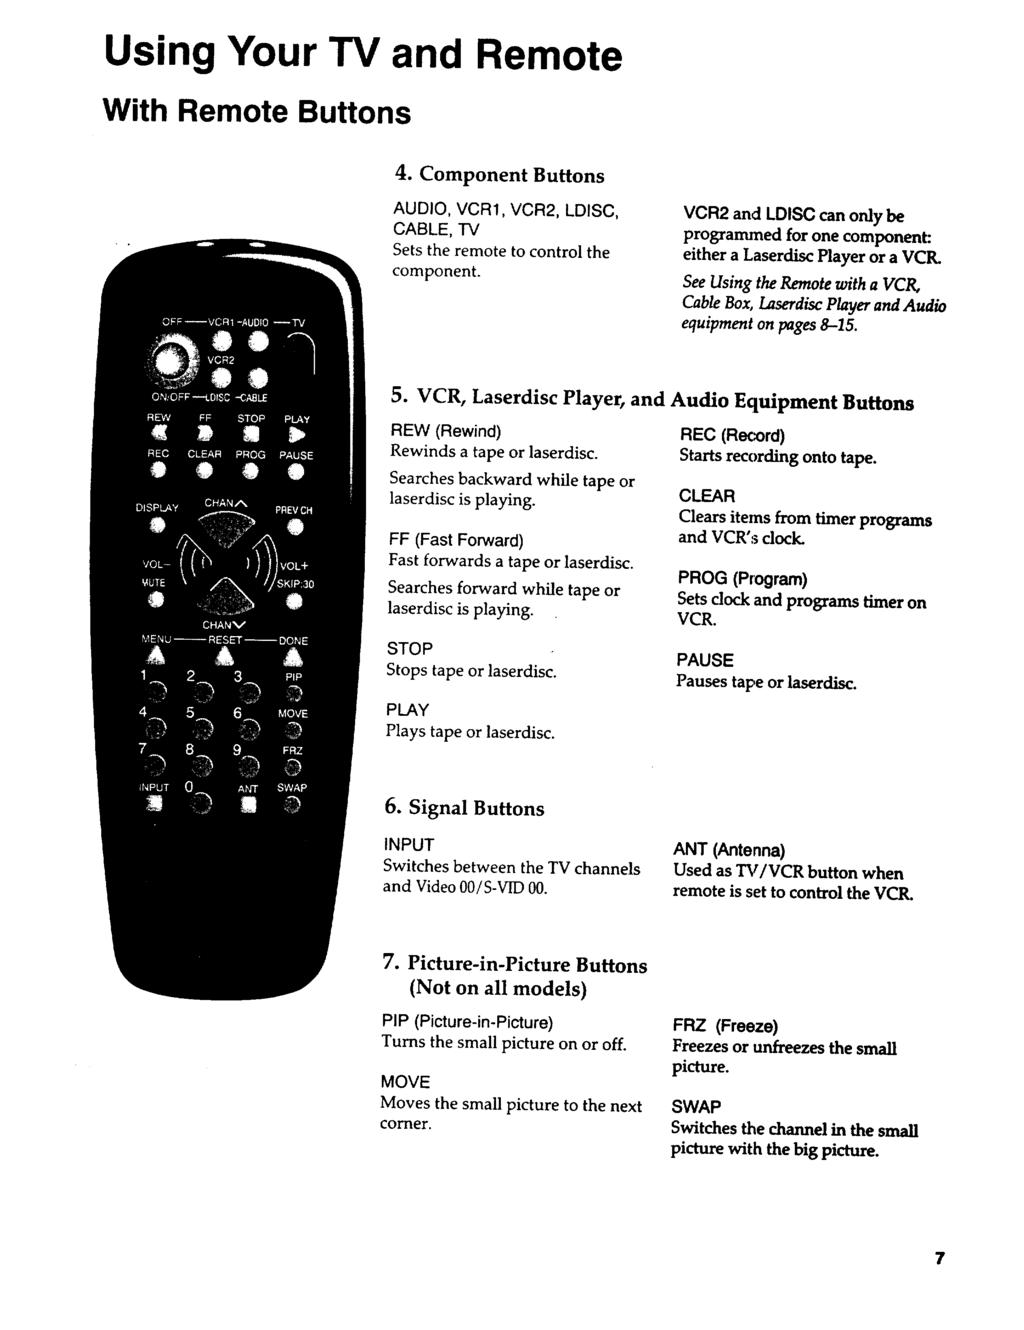 Using Your TV and Remote With Remote Buttons 4. Component Buttons AUDIO, VCR1, VCR2, LDISC, CABLE, "IV Setsthe remote to control the component.